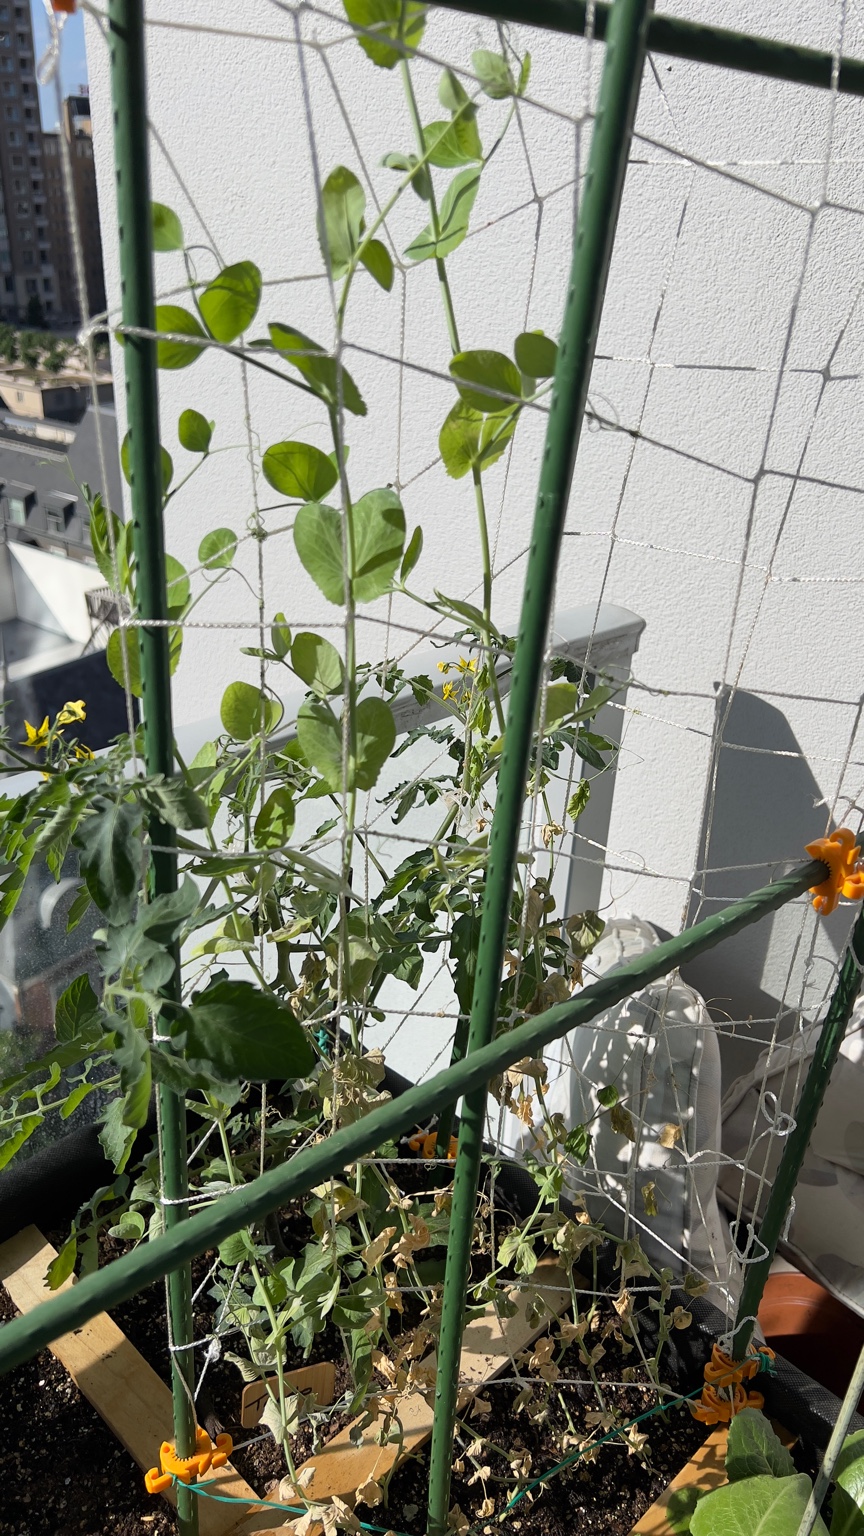 Assistance Needed: Sugar Snap Peas Yellowing and Wilting E15f0d10